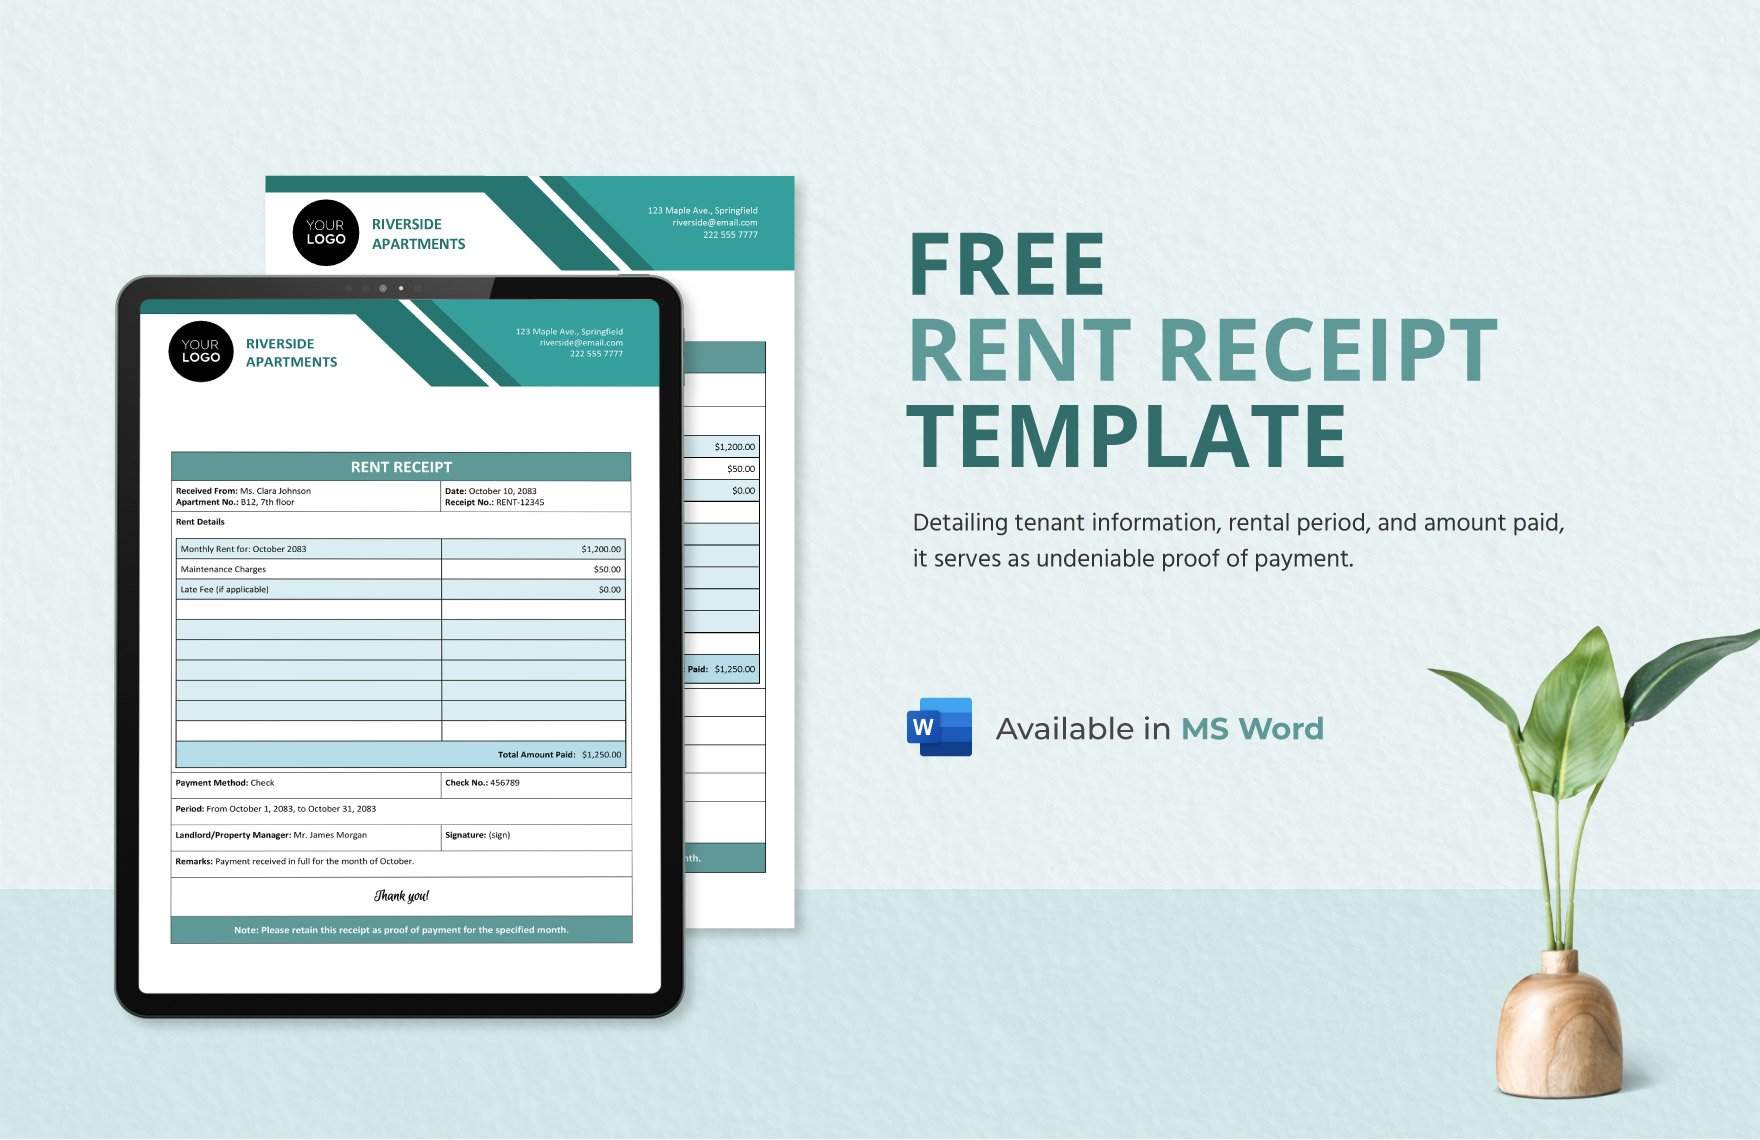 Free Rent Receipt Template - Download in Word | Template.net